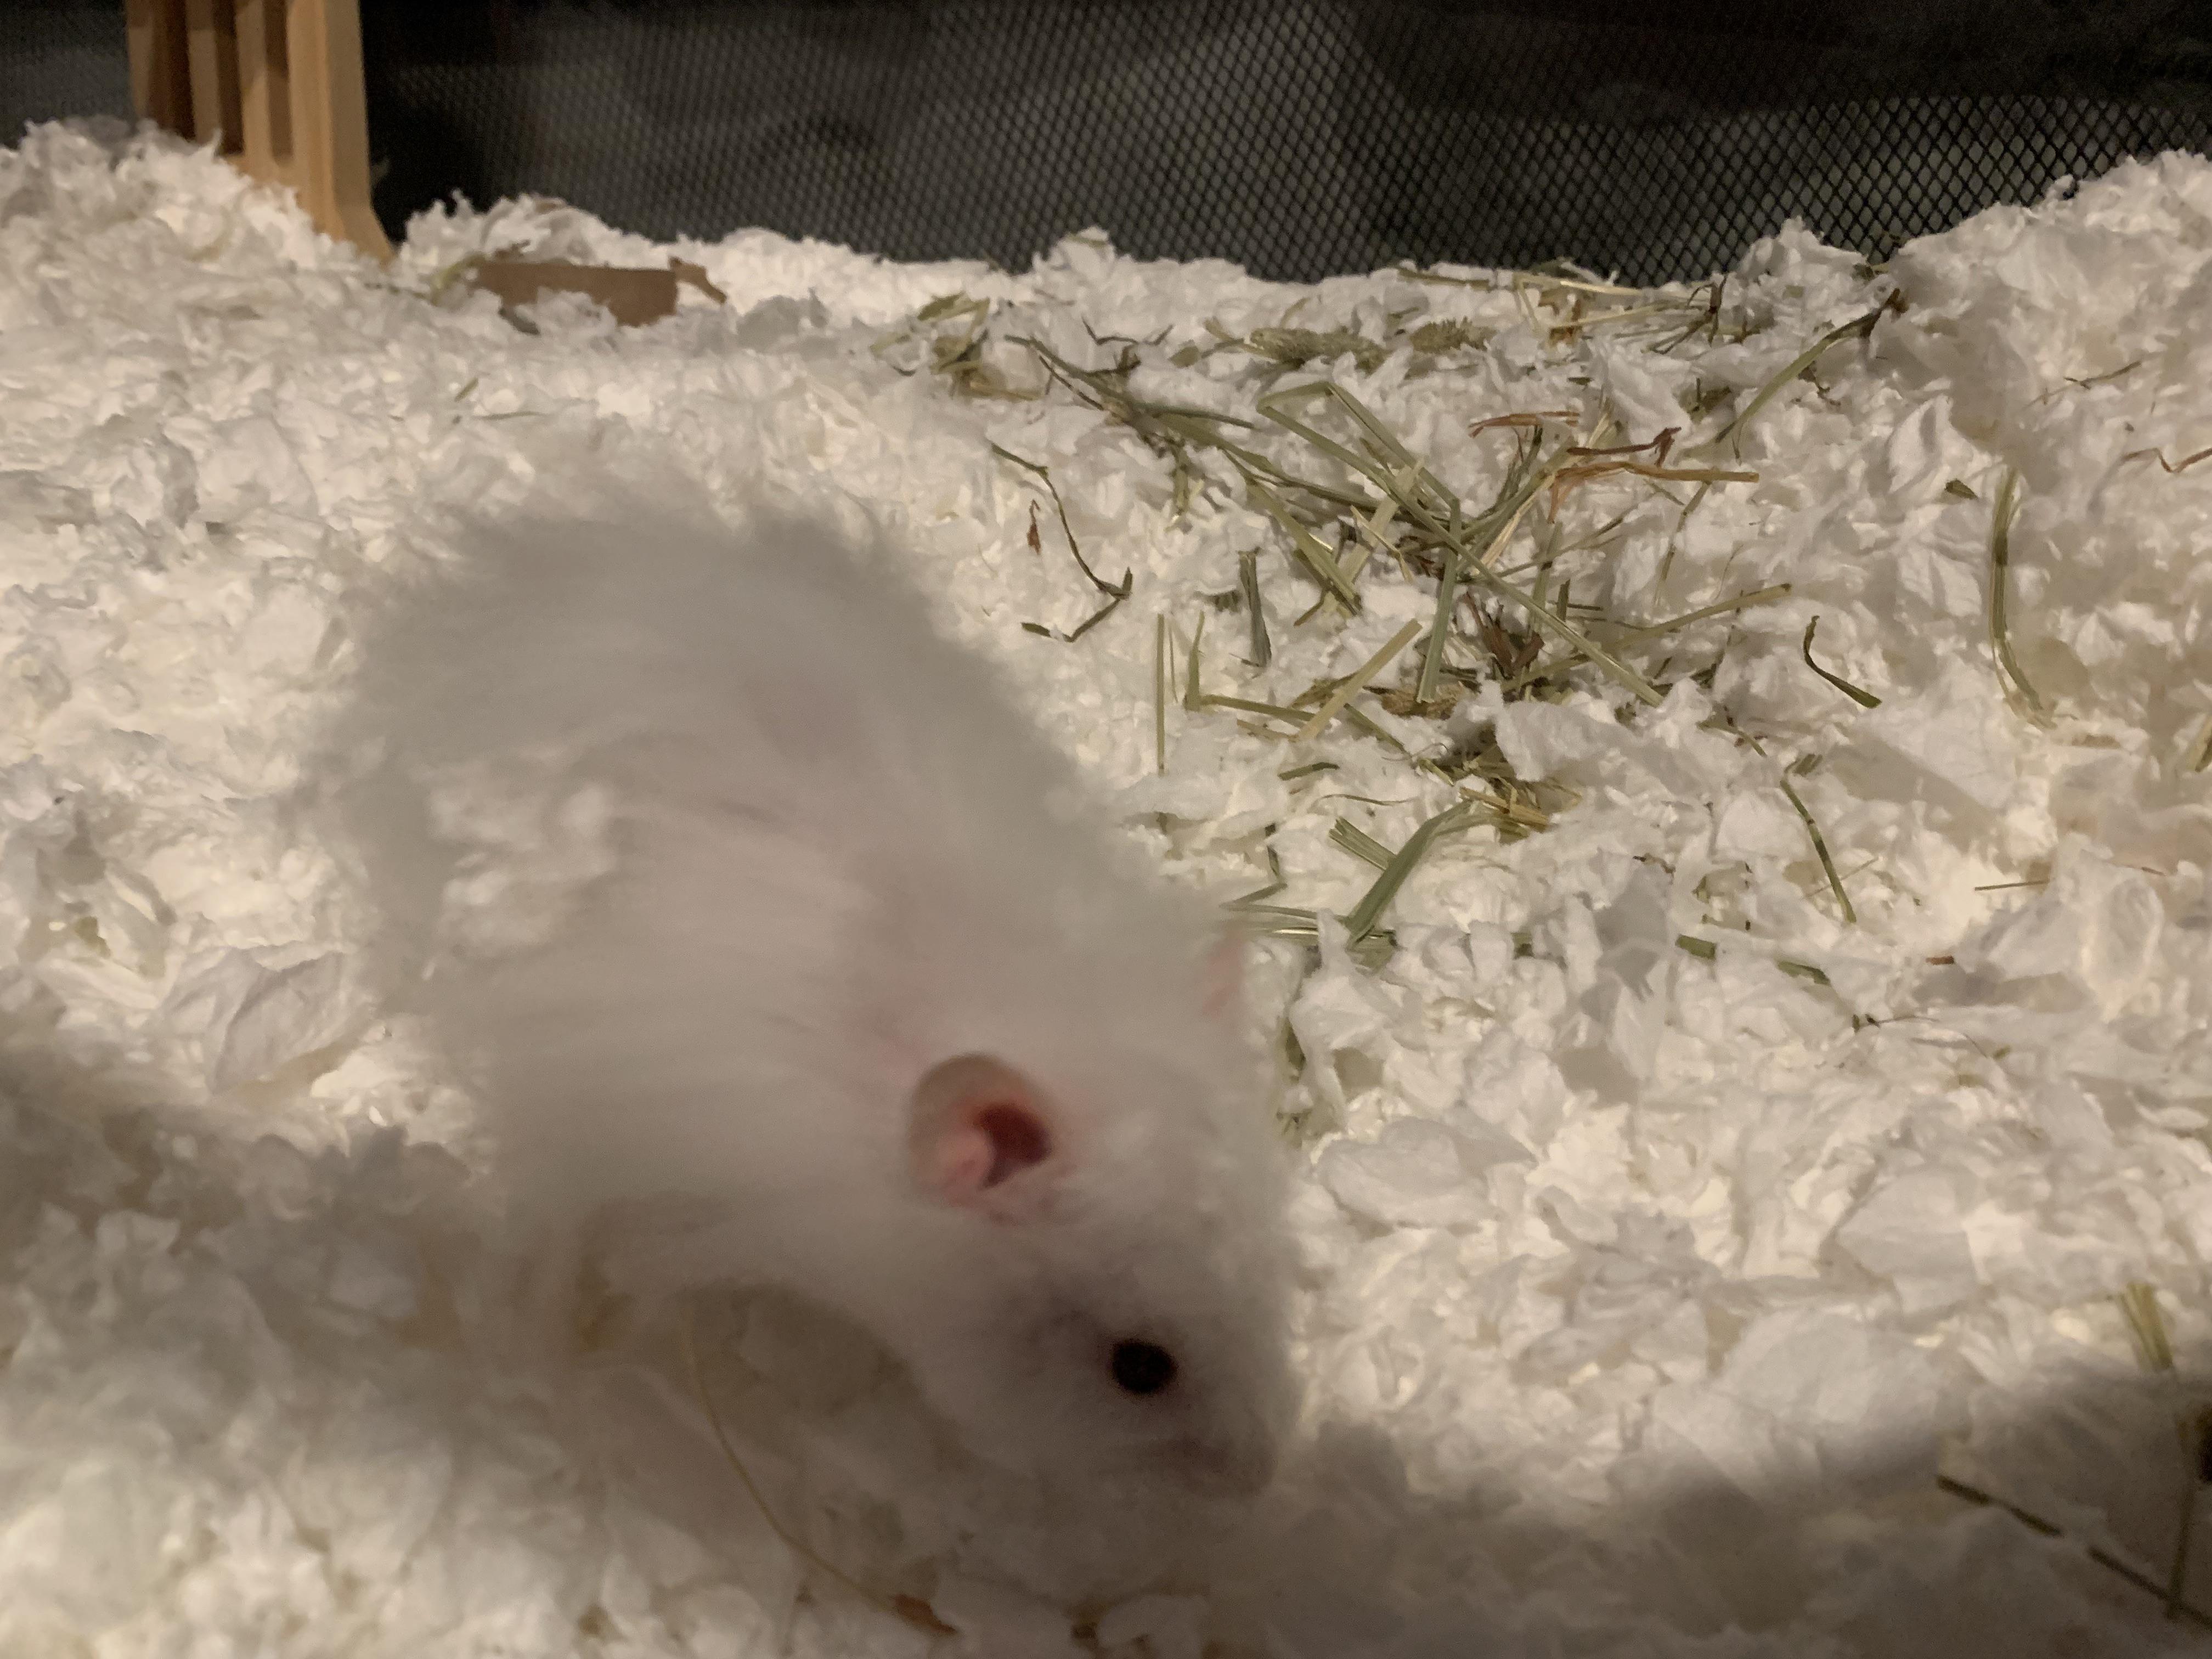 Long-haired Syrian hamster with bedding stuck in its fur